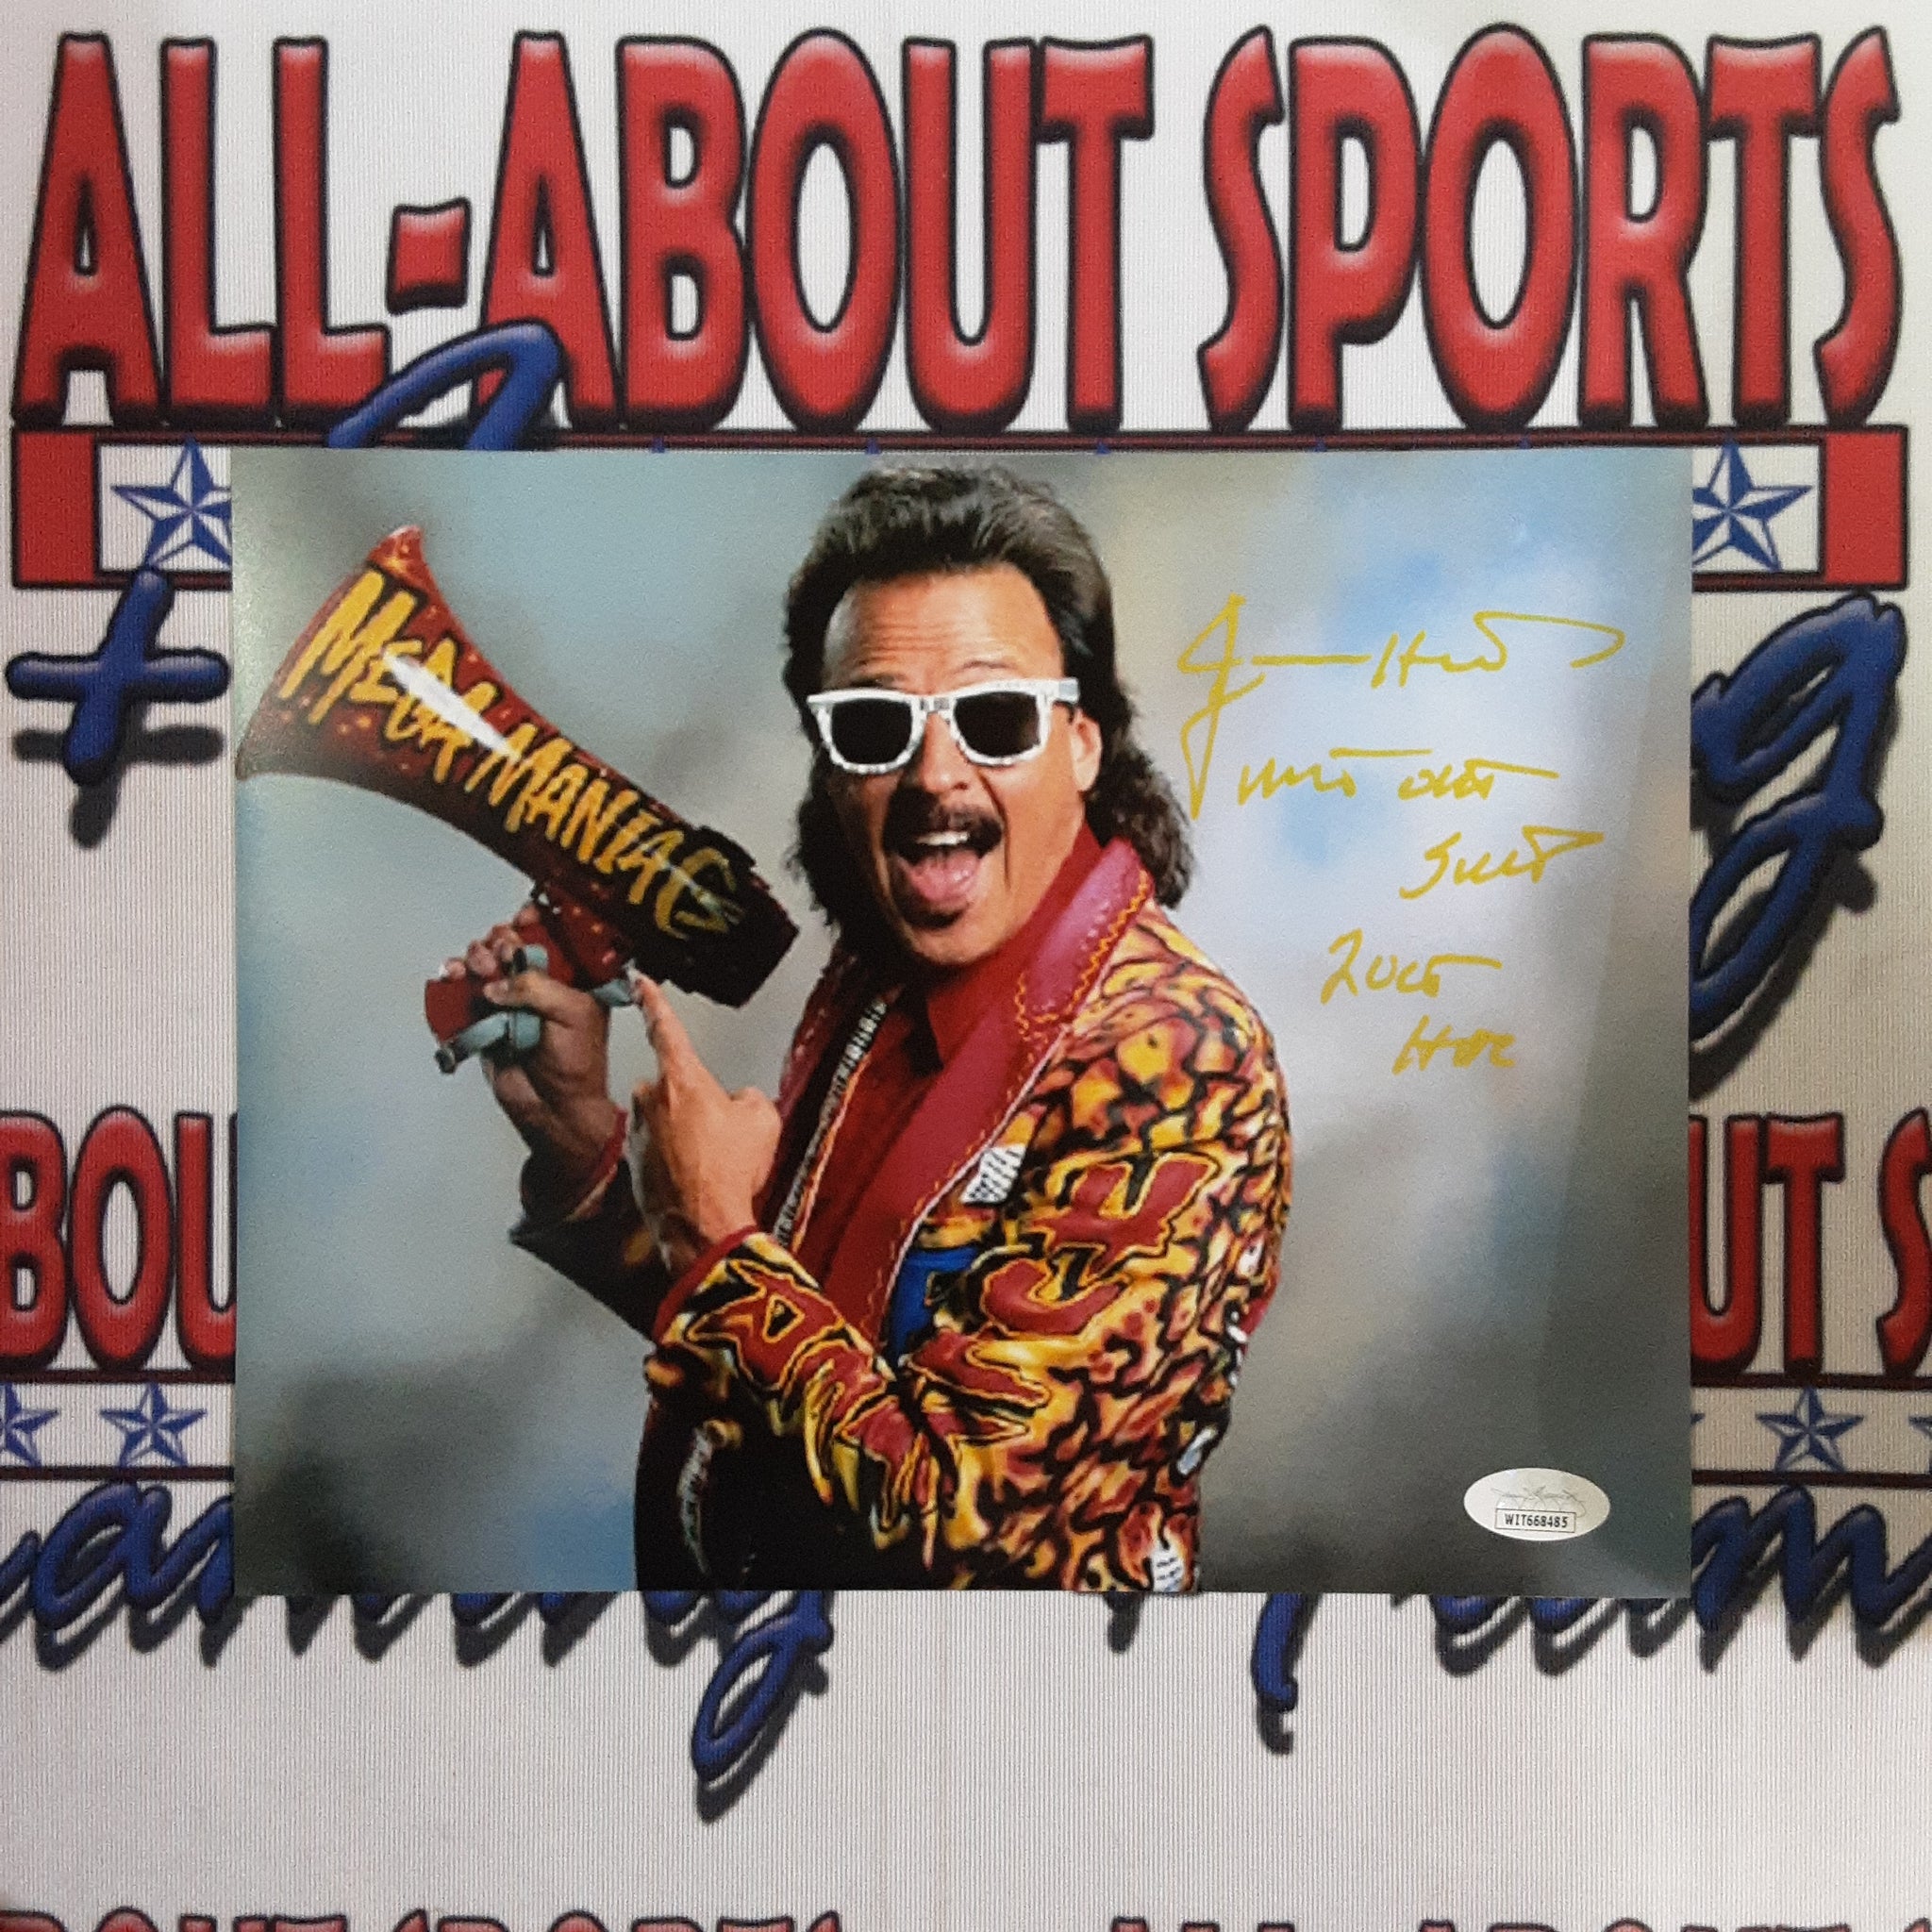 Jimmy Hart Authentic Signed 8x10 Photo Autographed with Inscription JSA.